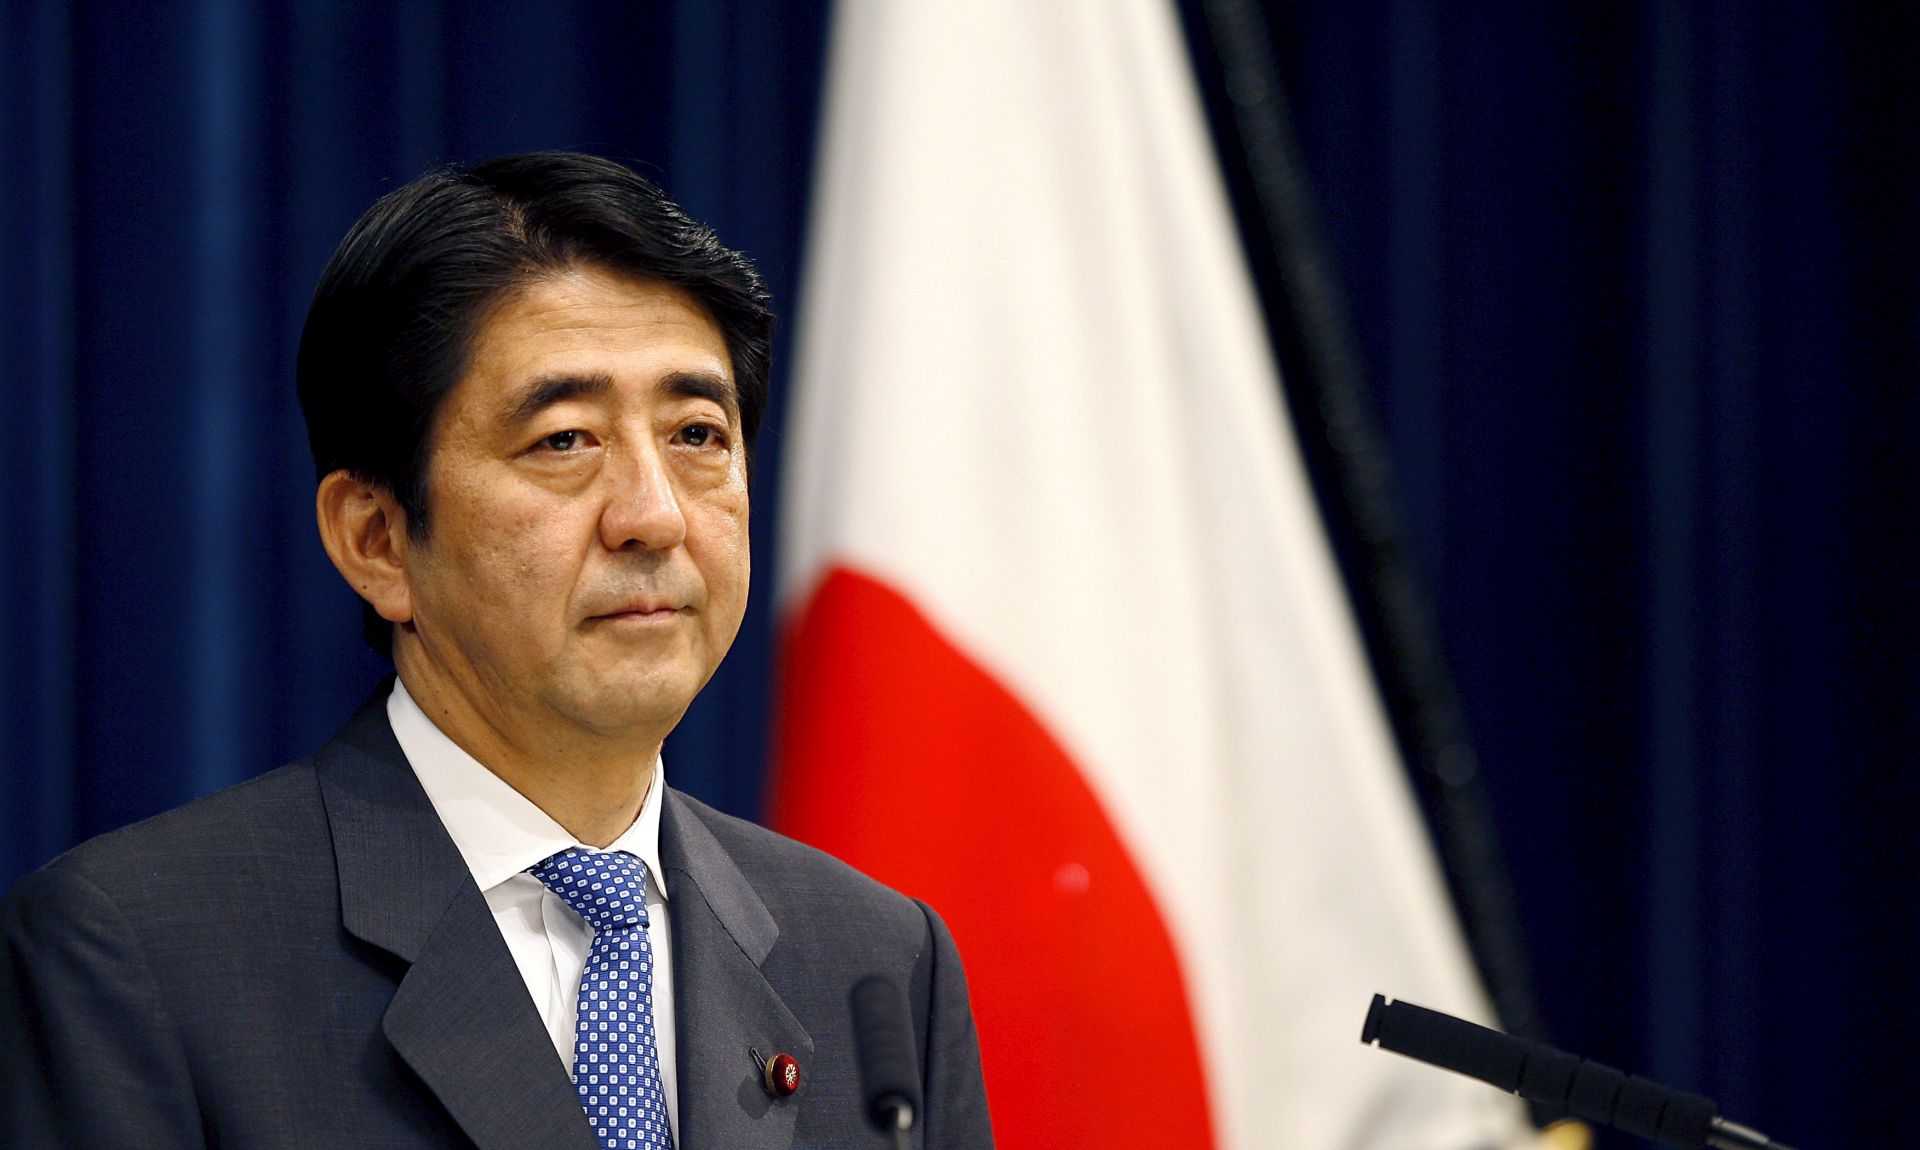 epa08630790 (FILE) - Shinzo Abe, Japanese Prime Minister, announces his resignation during a news conference at the prime minister's office in Tokyo, Japan, 12 September 2007 (reissued 28 August 2020). Abe is reportedly about to announce his resignation as prime minister on 28 August 2020.  EPA/ROBERT GILHOOLY